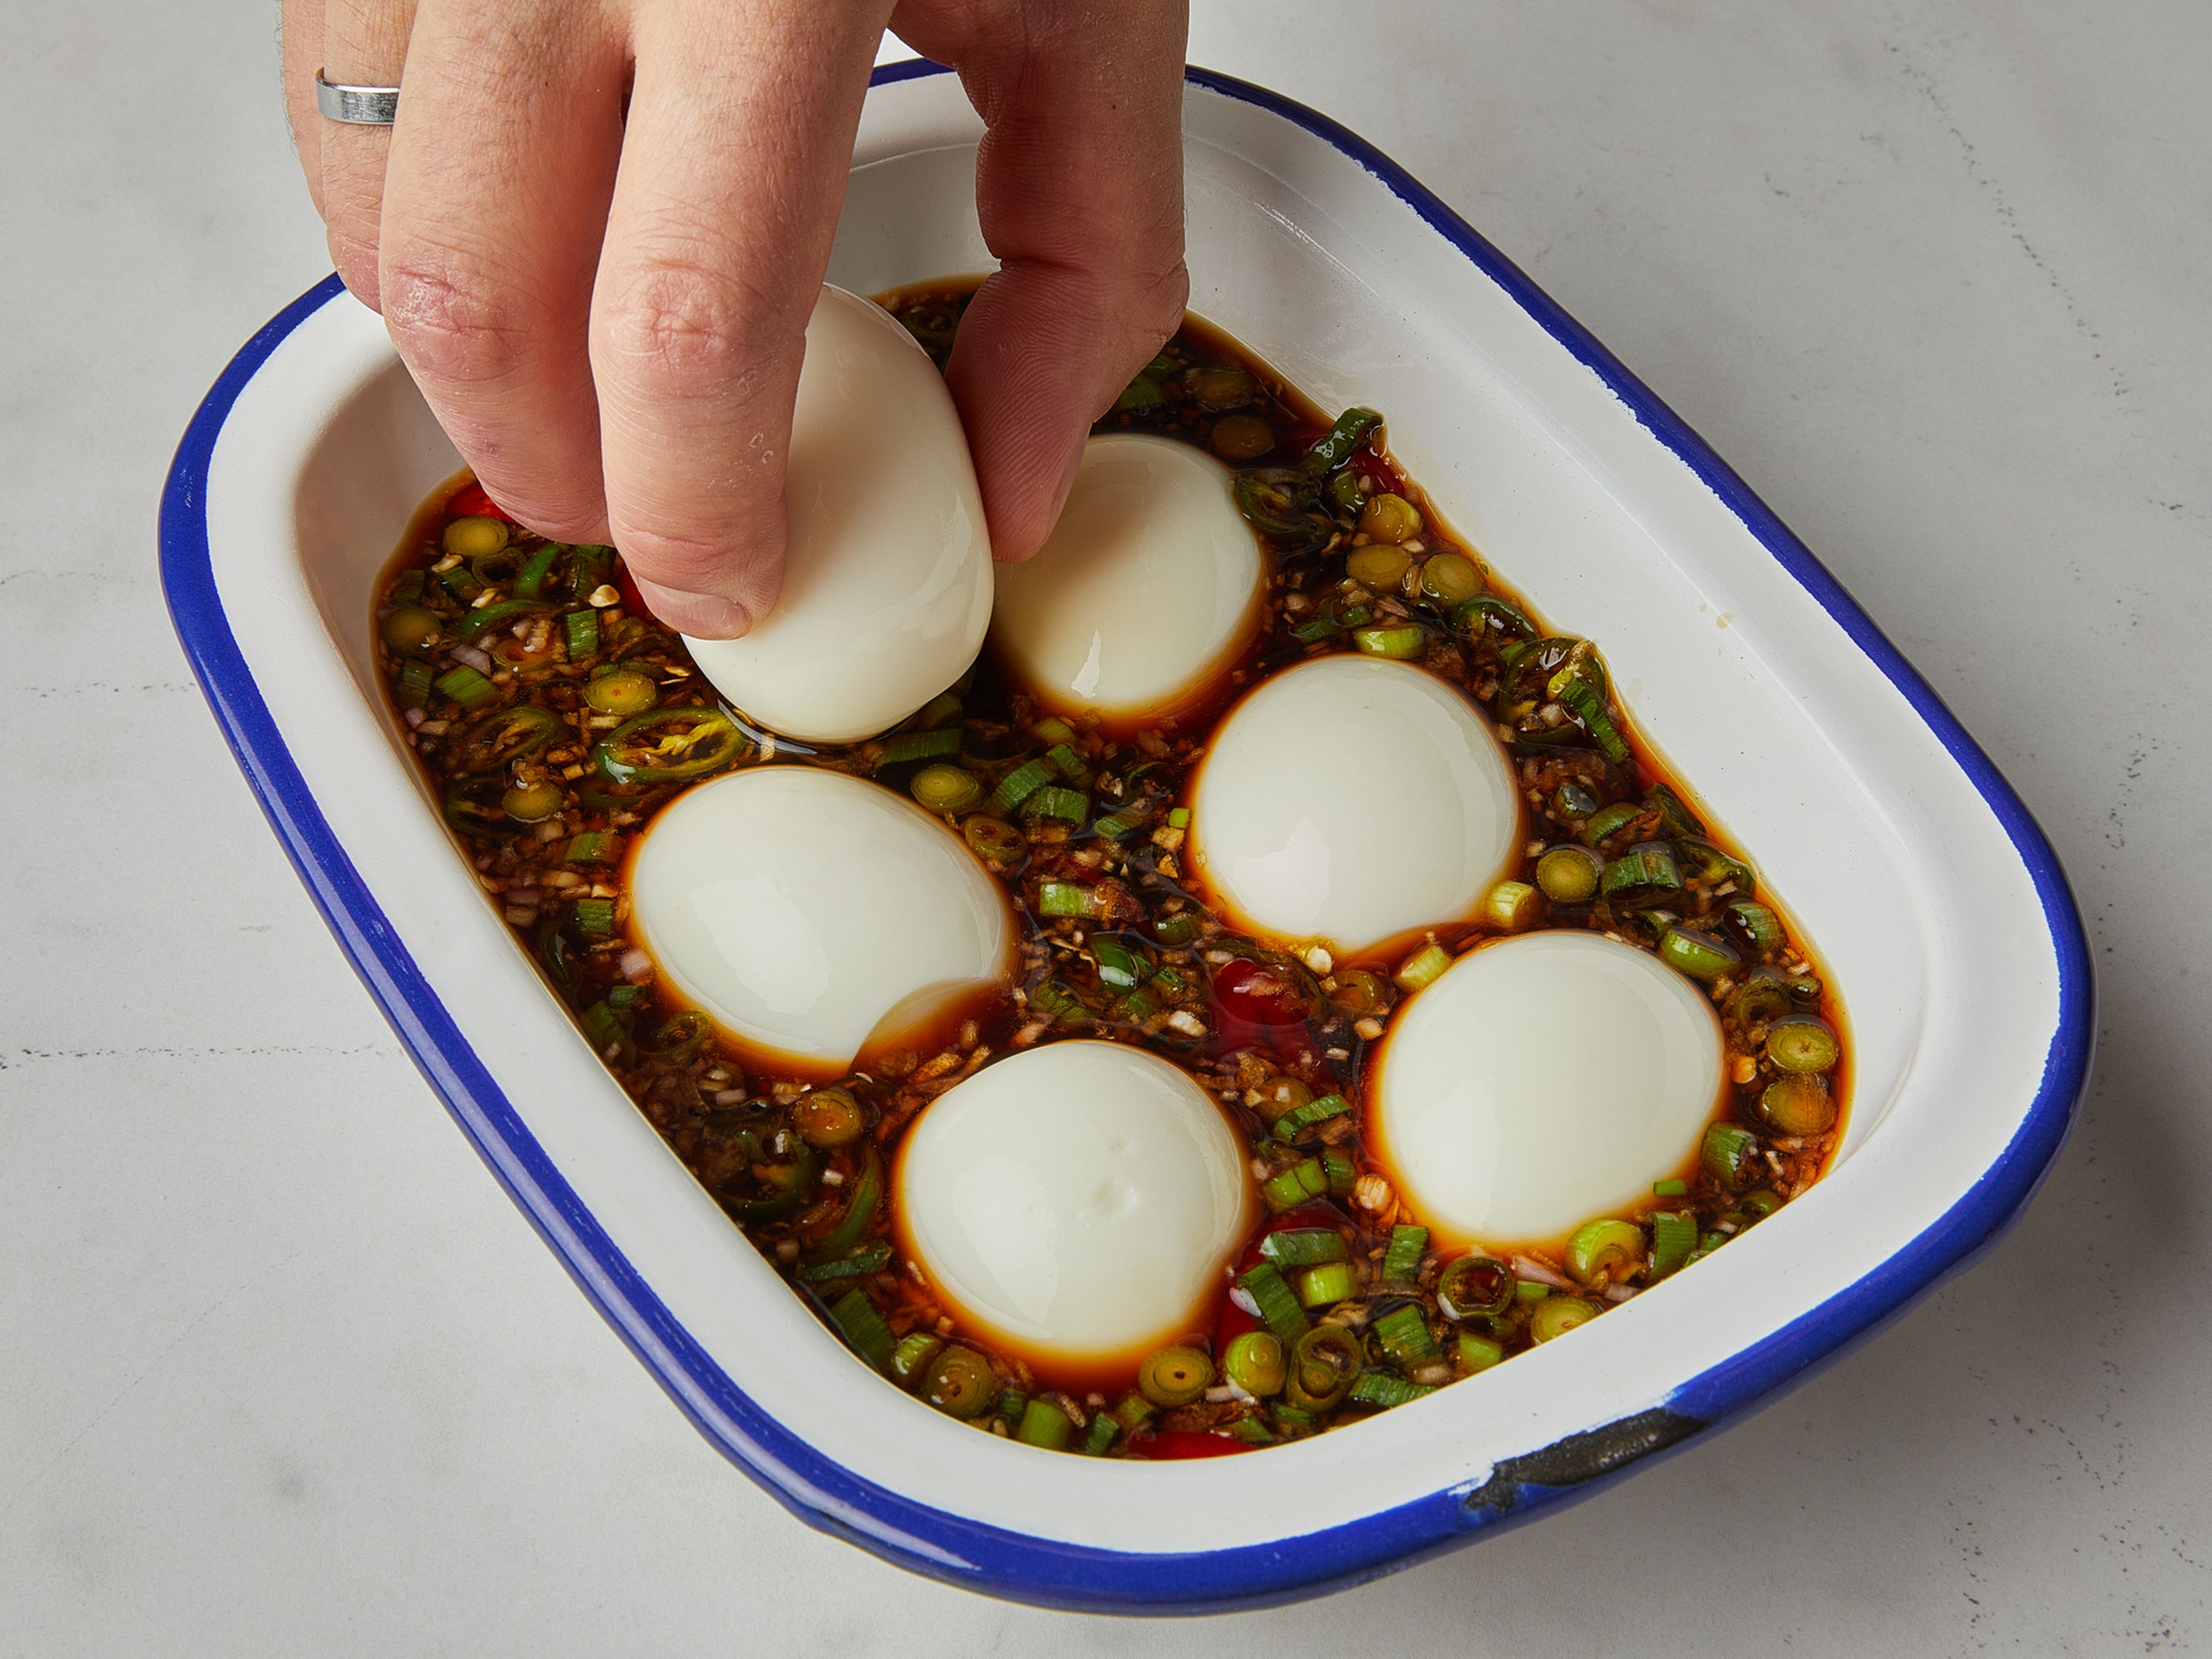 Once the eggs have cooled, peel and add to the marinade. Make sure the eggs are completely soaked in the marinade. Cover with plastic wrap and store in the refrigerator for at least 6 hours, or ideally overnight. Flip once halfway through so the eggs will be marinated evenly on all sides.